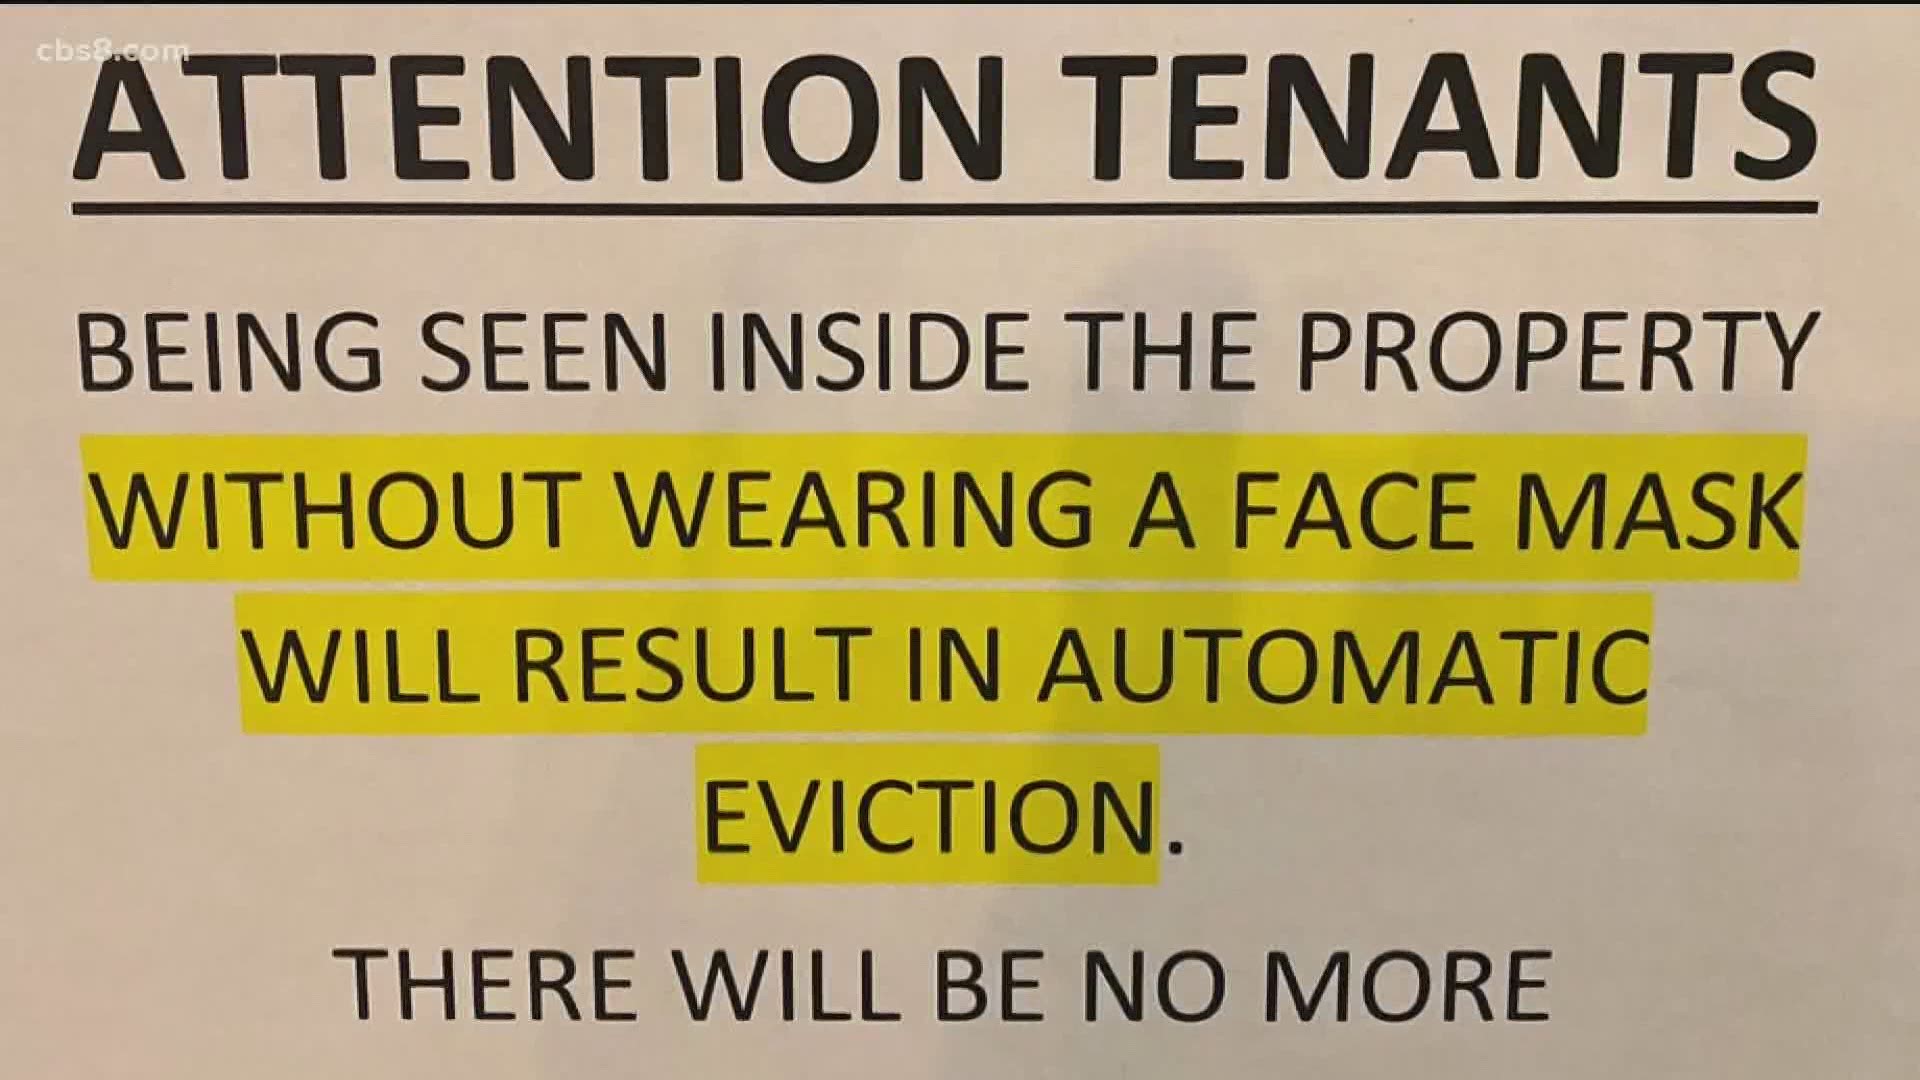 News 8 asked a lawyer if not wearing a mask is grounds to evict someone if there's a ban on evicting tenants right now.